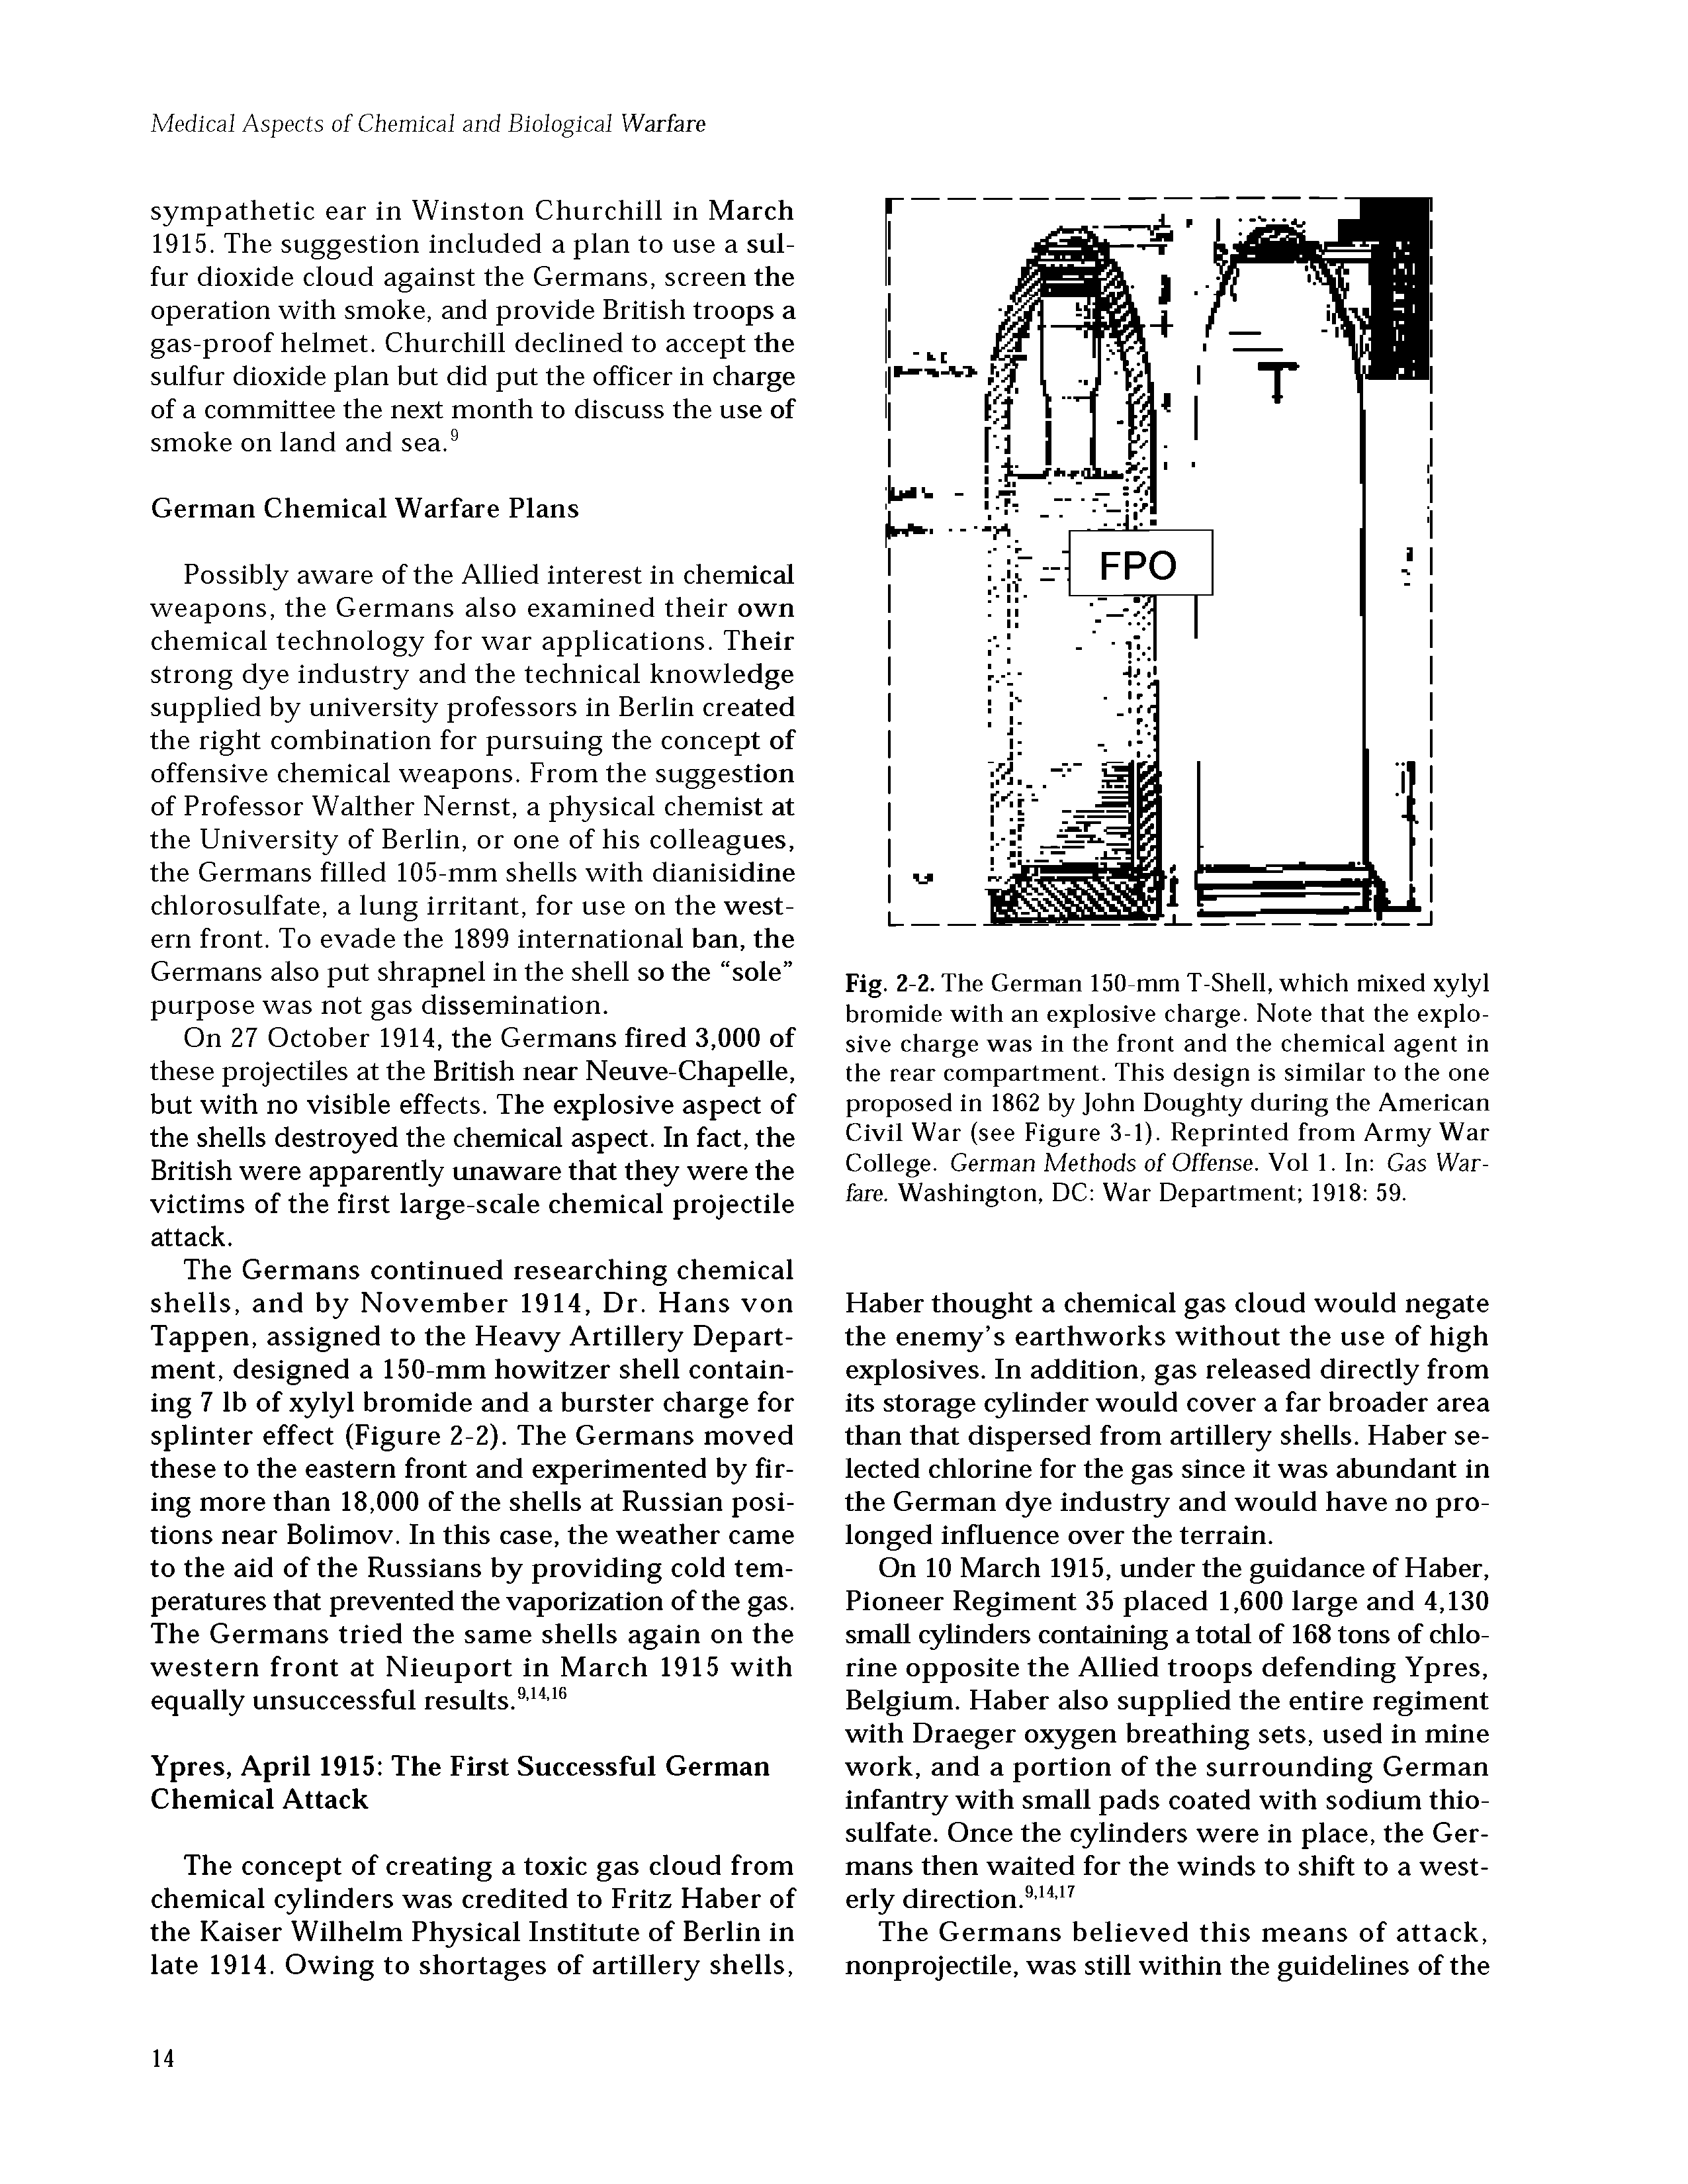 Fig. 2-2. The German 150-mm T-Shell, which mixed xylyl bromide with an explosive charge. Note that the explosive charge was in the front and the chemical agent in the rear compartment. This design is similar to the one proposed in 1862 by John Doughty during the American Civil War (see Figure 3-1). Reprinted from Army War College. German Methods of Offense. Vol 1. In Gas Warfare. Washington, DC War Department 1918 59.